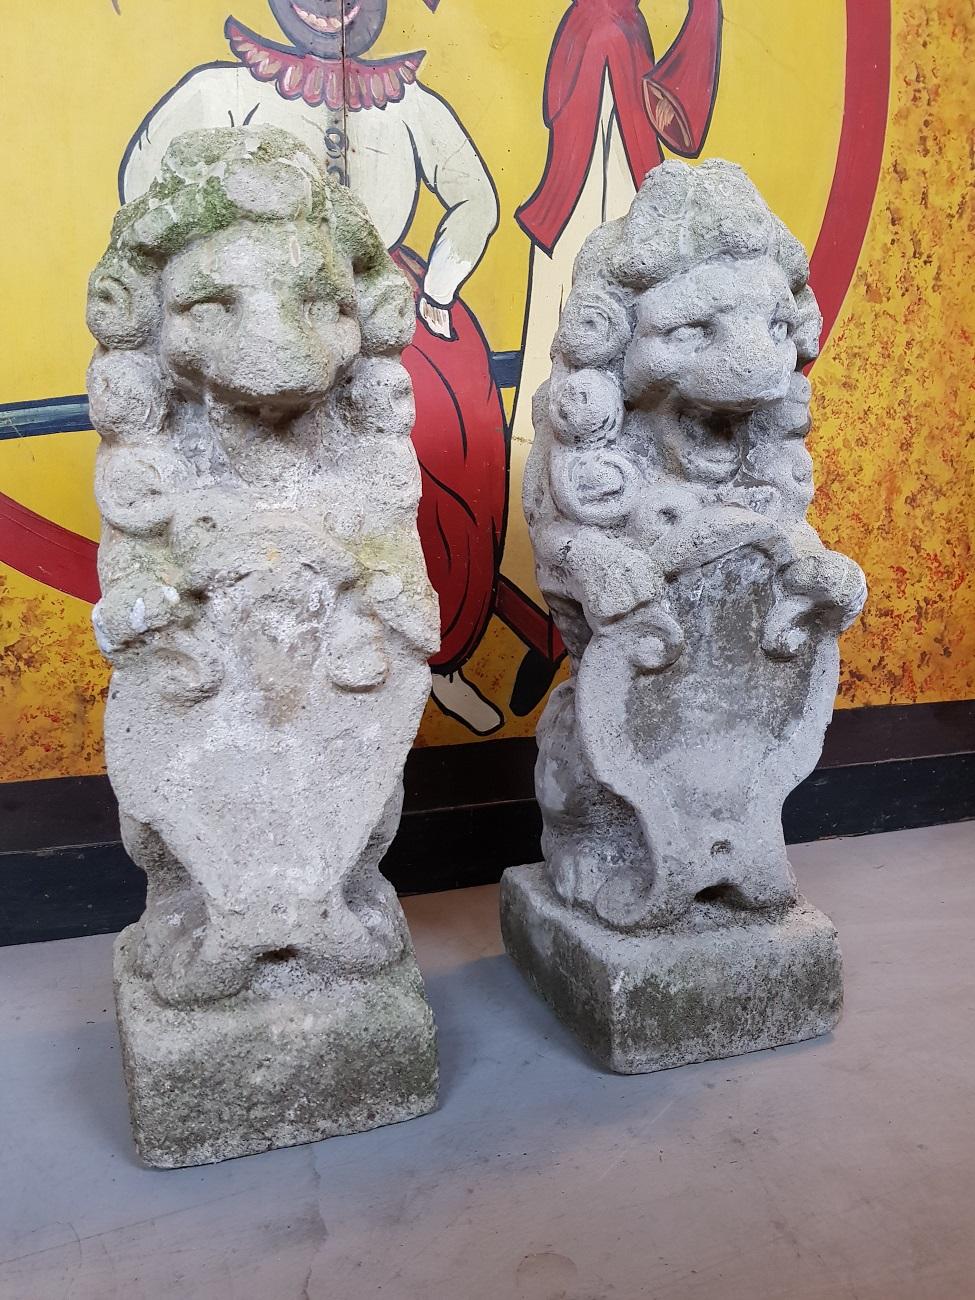 Set of two late 19th century stone garden lions holding a shield (both have traces of erosion).

The measurements are,
Depth 19 cm/ 7.4 inch.
Width 19 cm/ 7.4 inch.
Height 57 cm/ 22.4 inch.